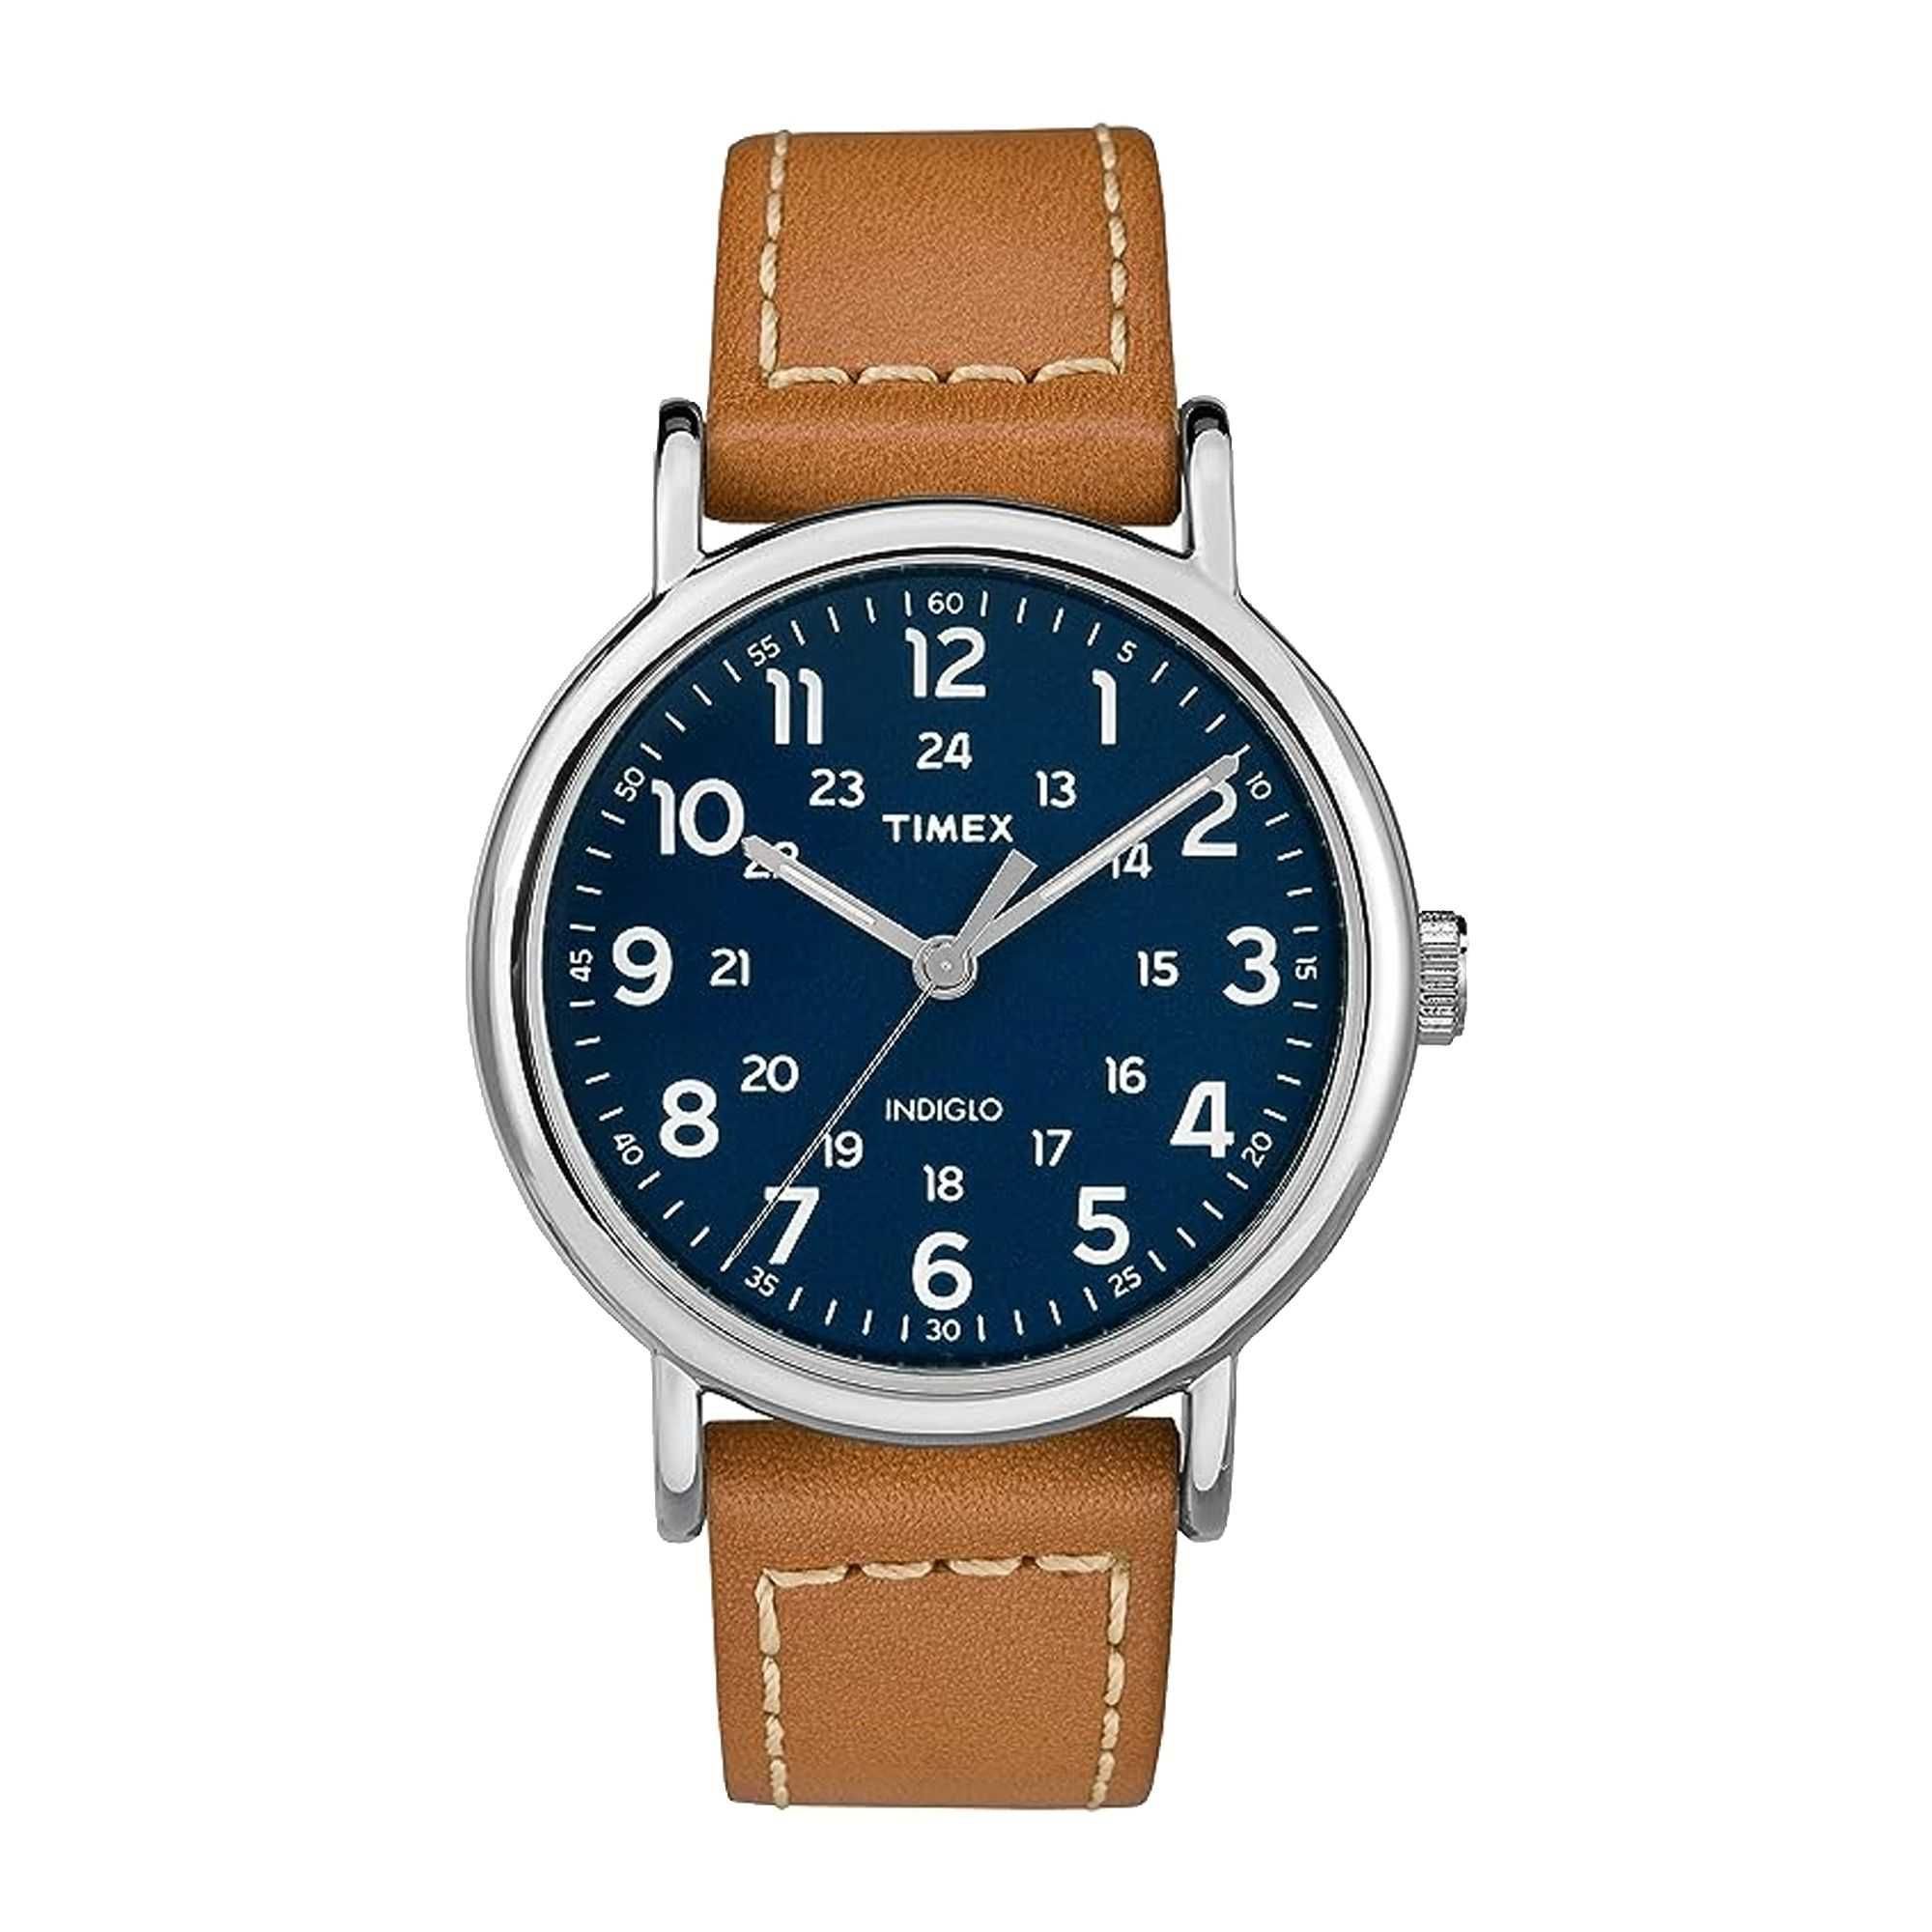 Timex Men's Indiglo Chrome Round Dial With Navy Blue Dial  Plain Brown  Strap Analog Watch, TW2R42500